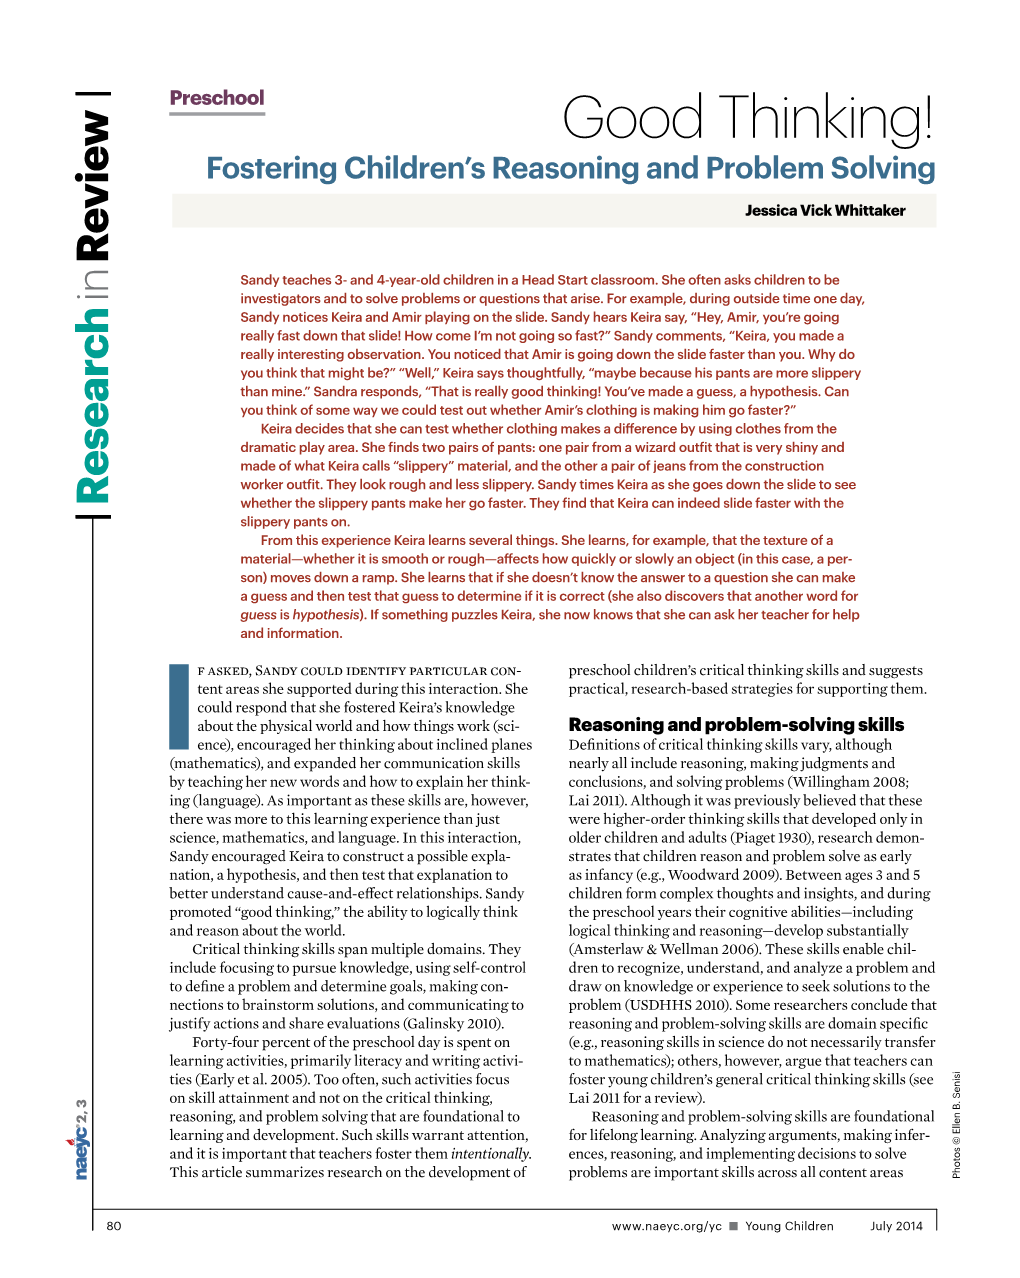 Good Thinking! Fostering Children's Reasoning and Problem Solving